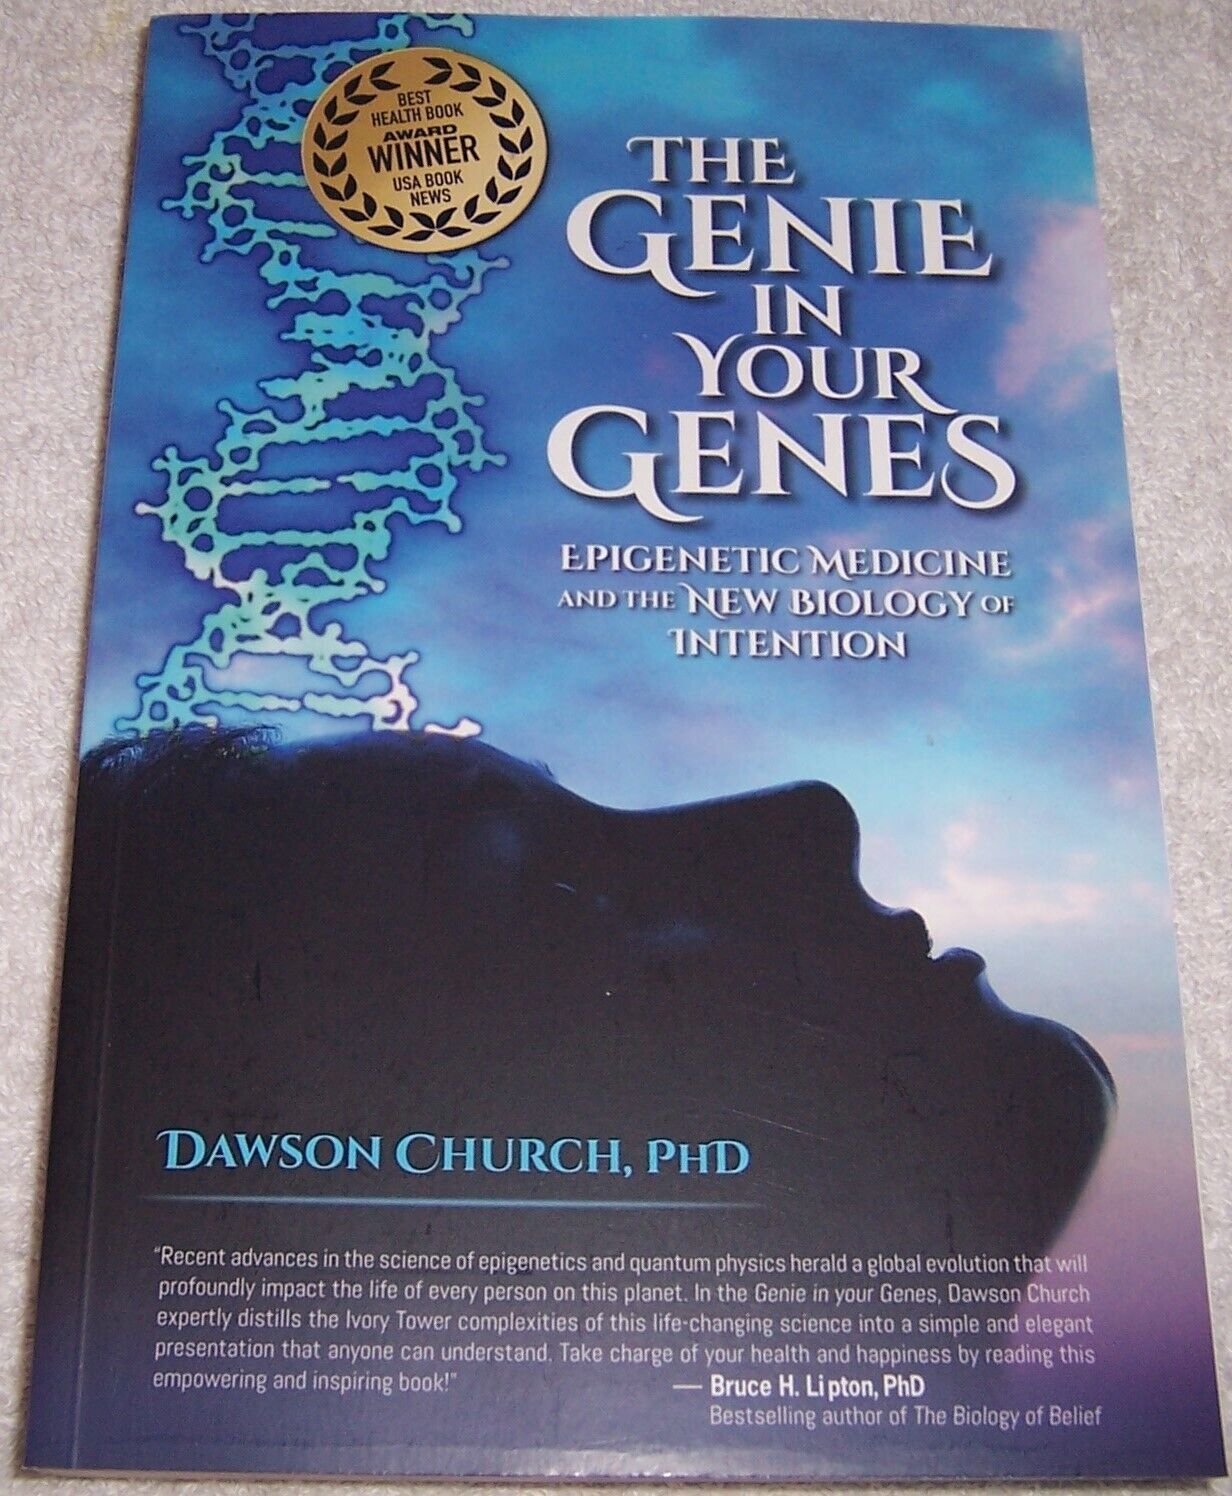 The Genie in Your Genes: Epigenetic Medicine and the New Biology of Intention pb